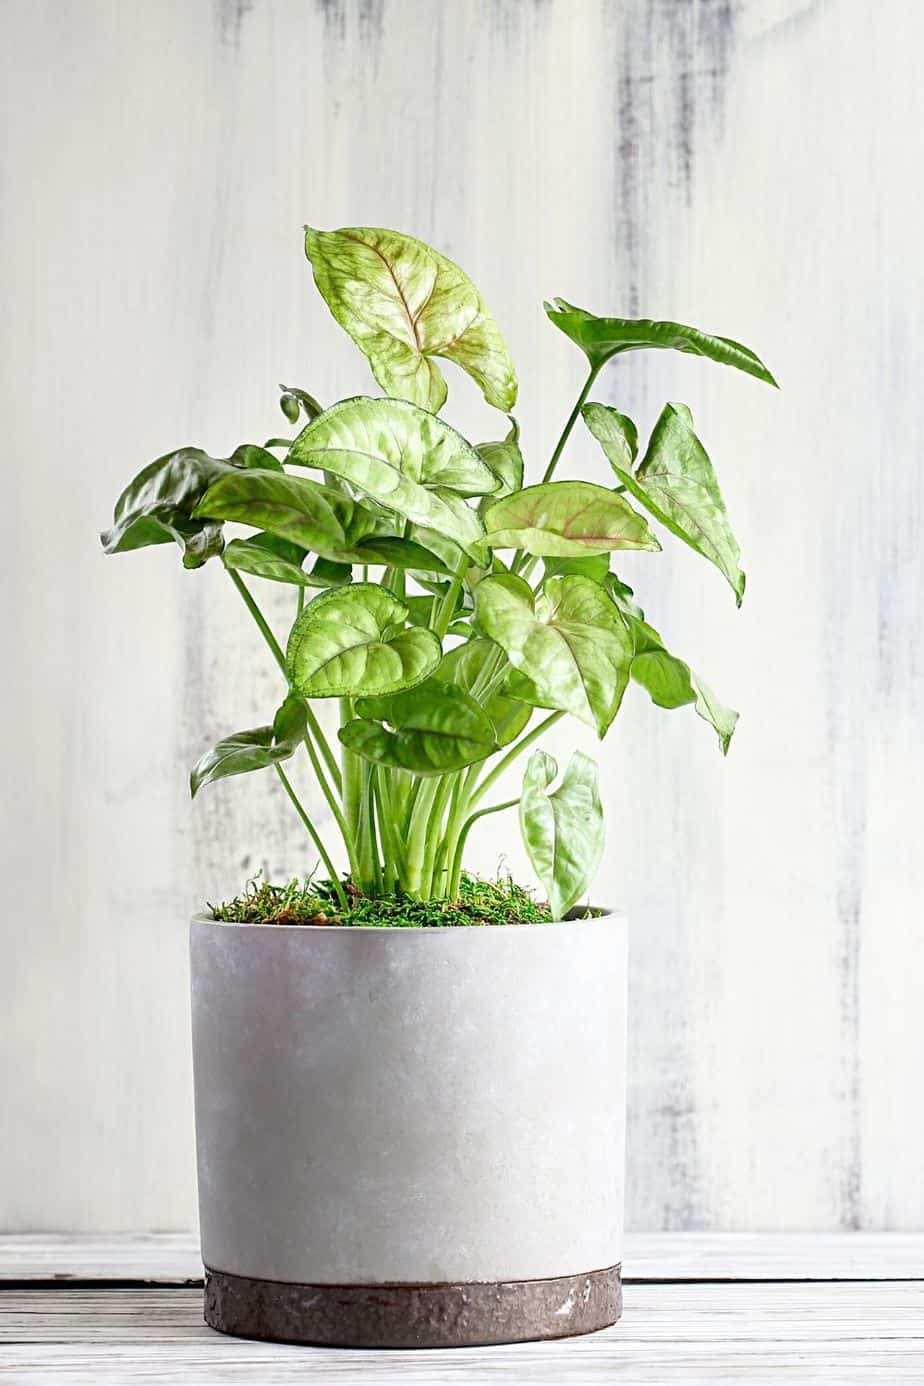 Arrowhead Plant grows well indoors, especially in the water